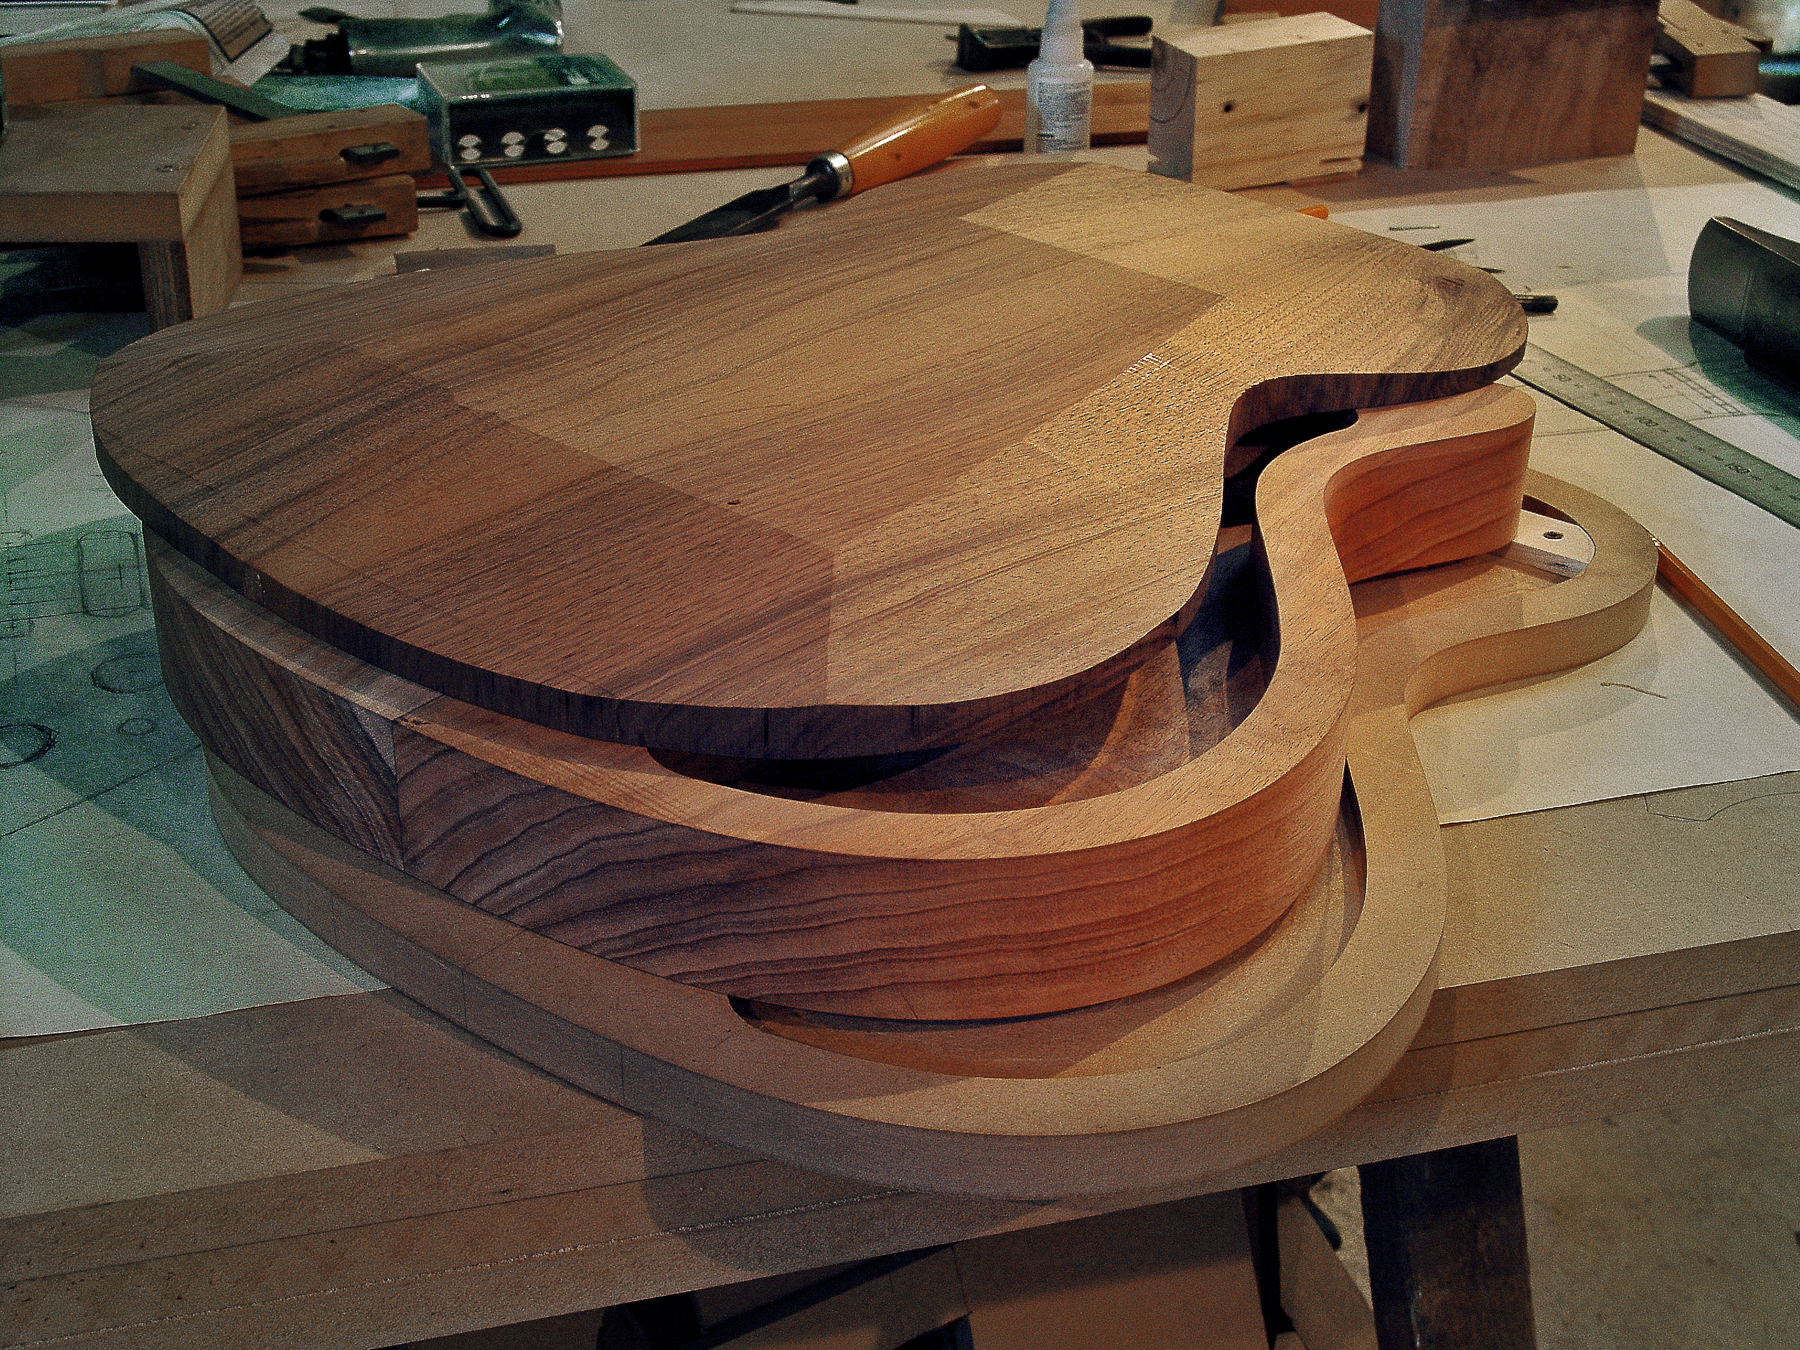 Luthier Peter Stephen assembles the back, sides and soundboard of a semiacoustic electric guitar